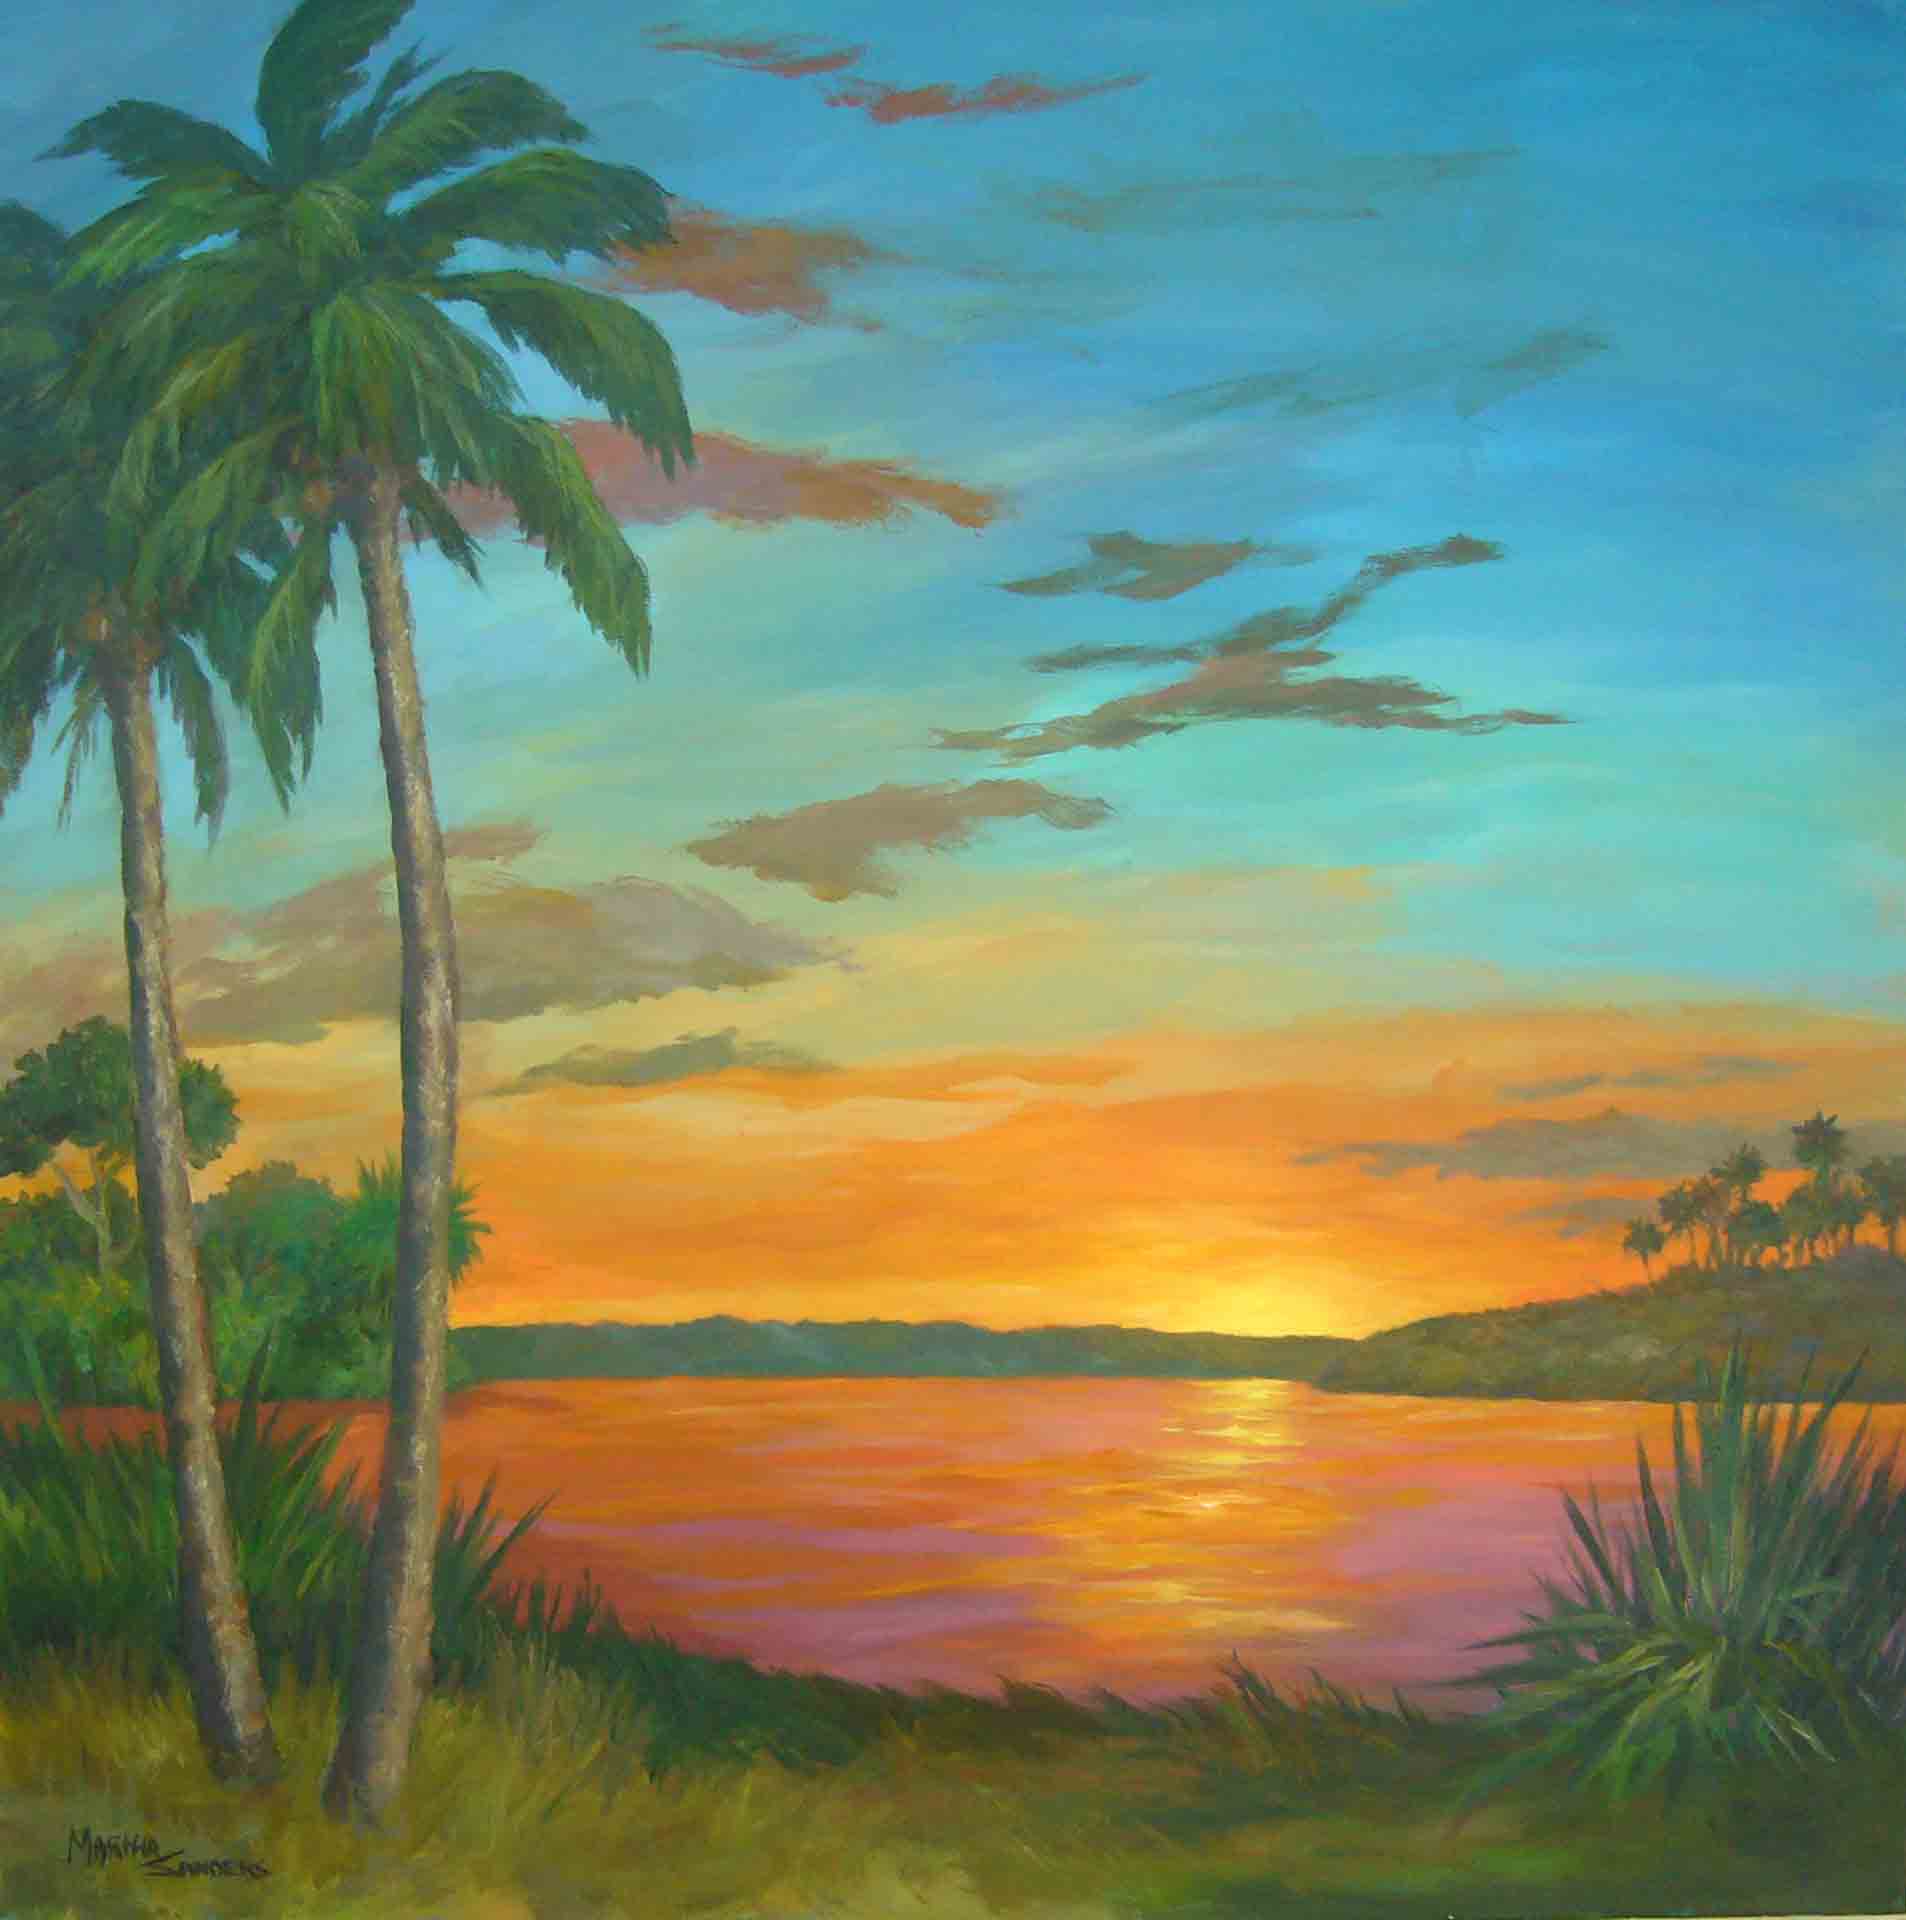 A painting of the sunset with palm trees